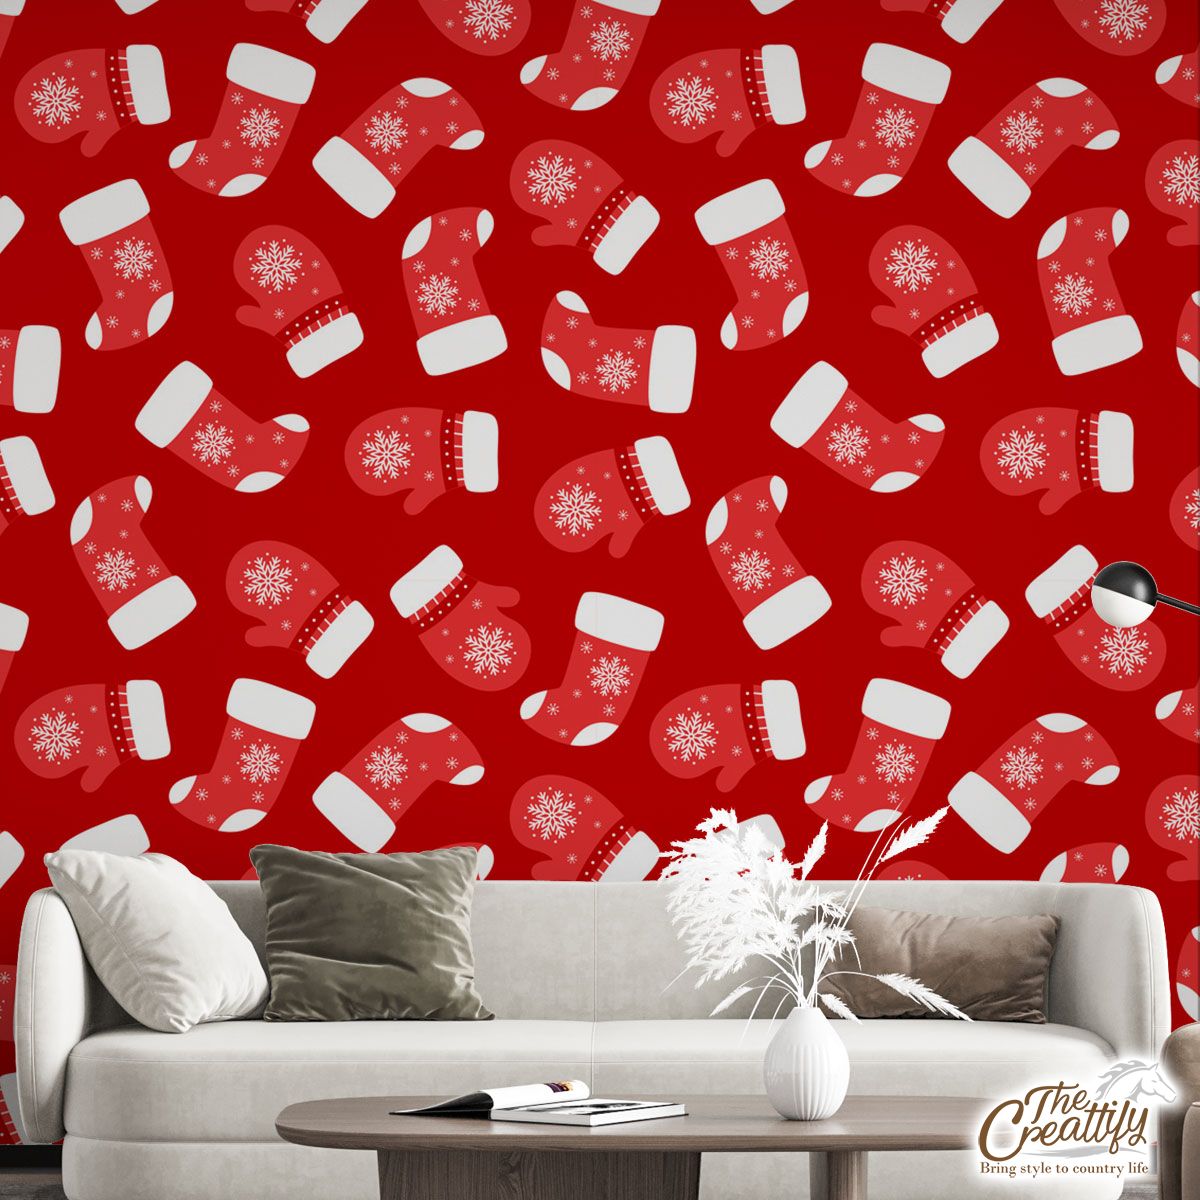 Christmas Socks, Santa Hat And Wool Gloves Filled In Red Snowflake Pattern Wall Mural